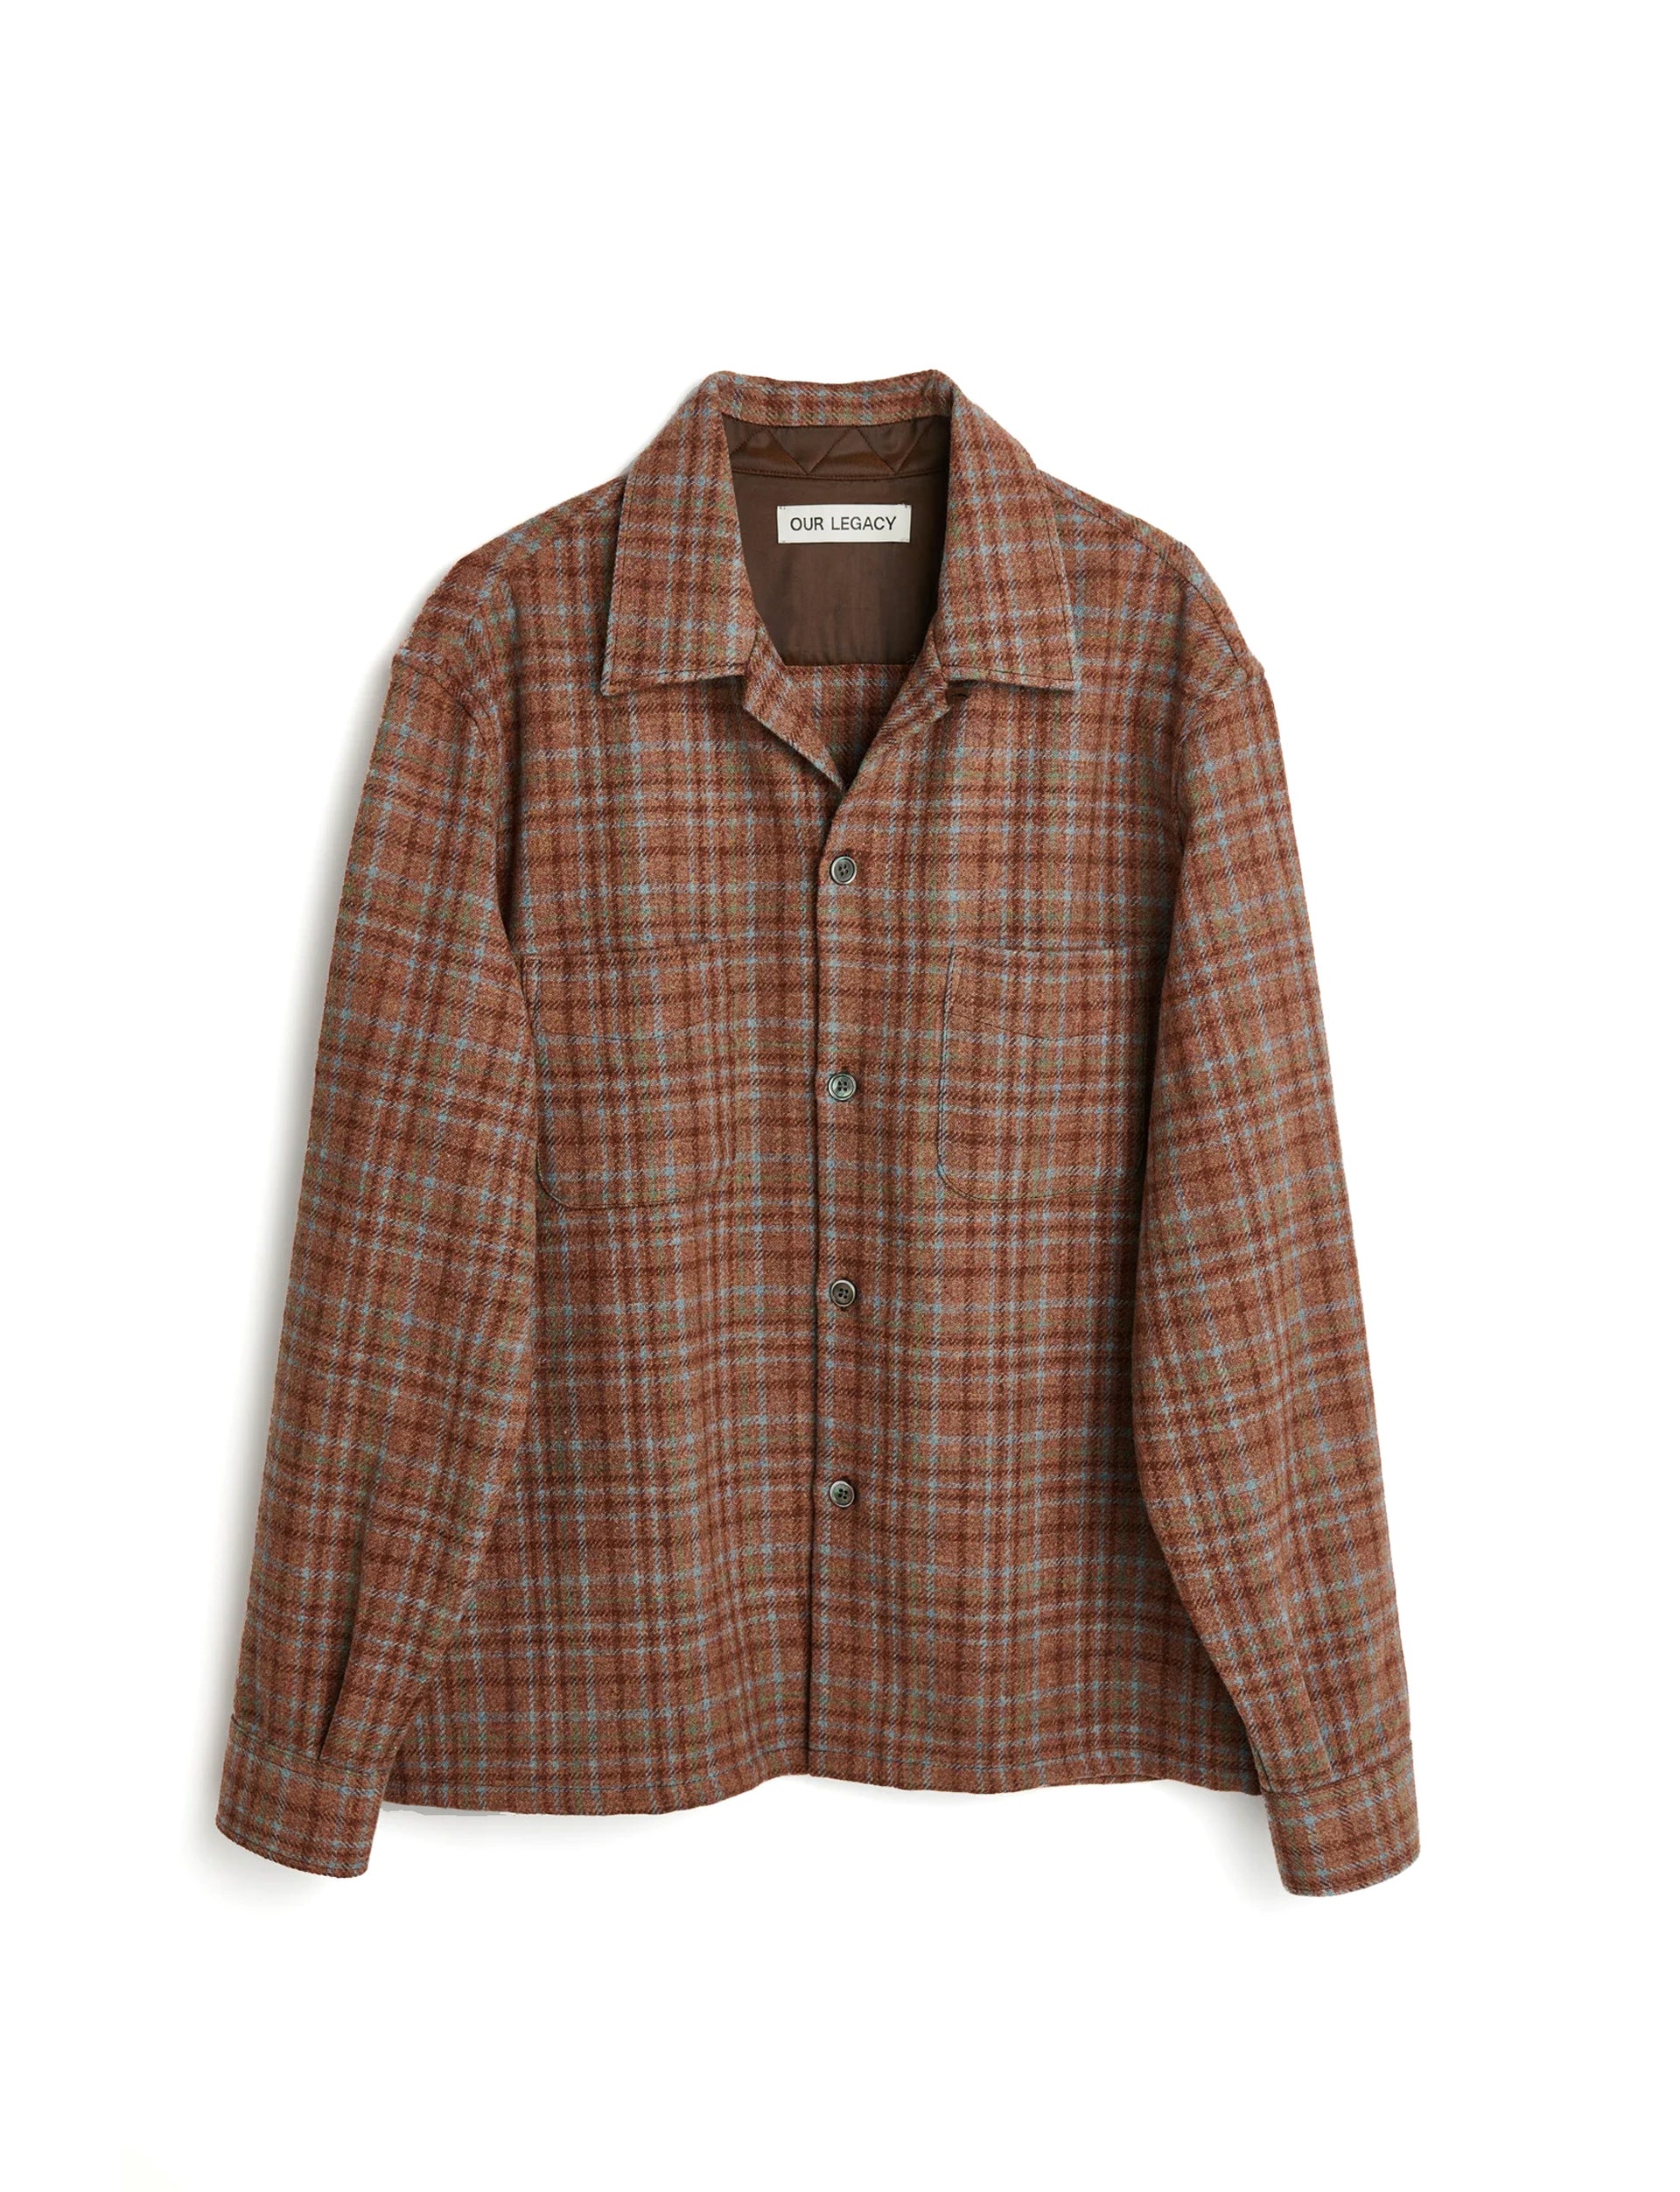 OUR LEGACY HEUSEN SHIRT Rust Check Country Wool